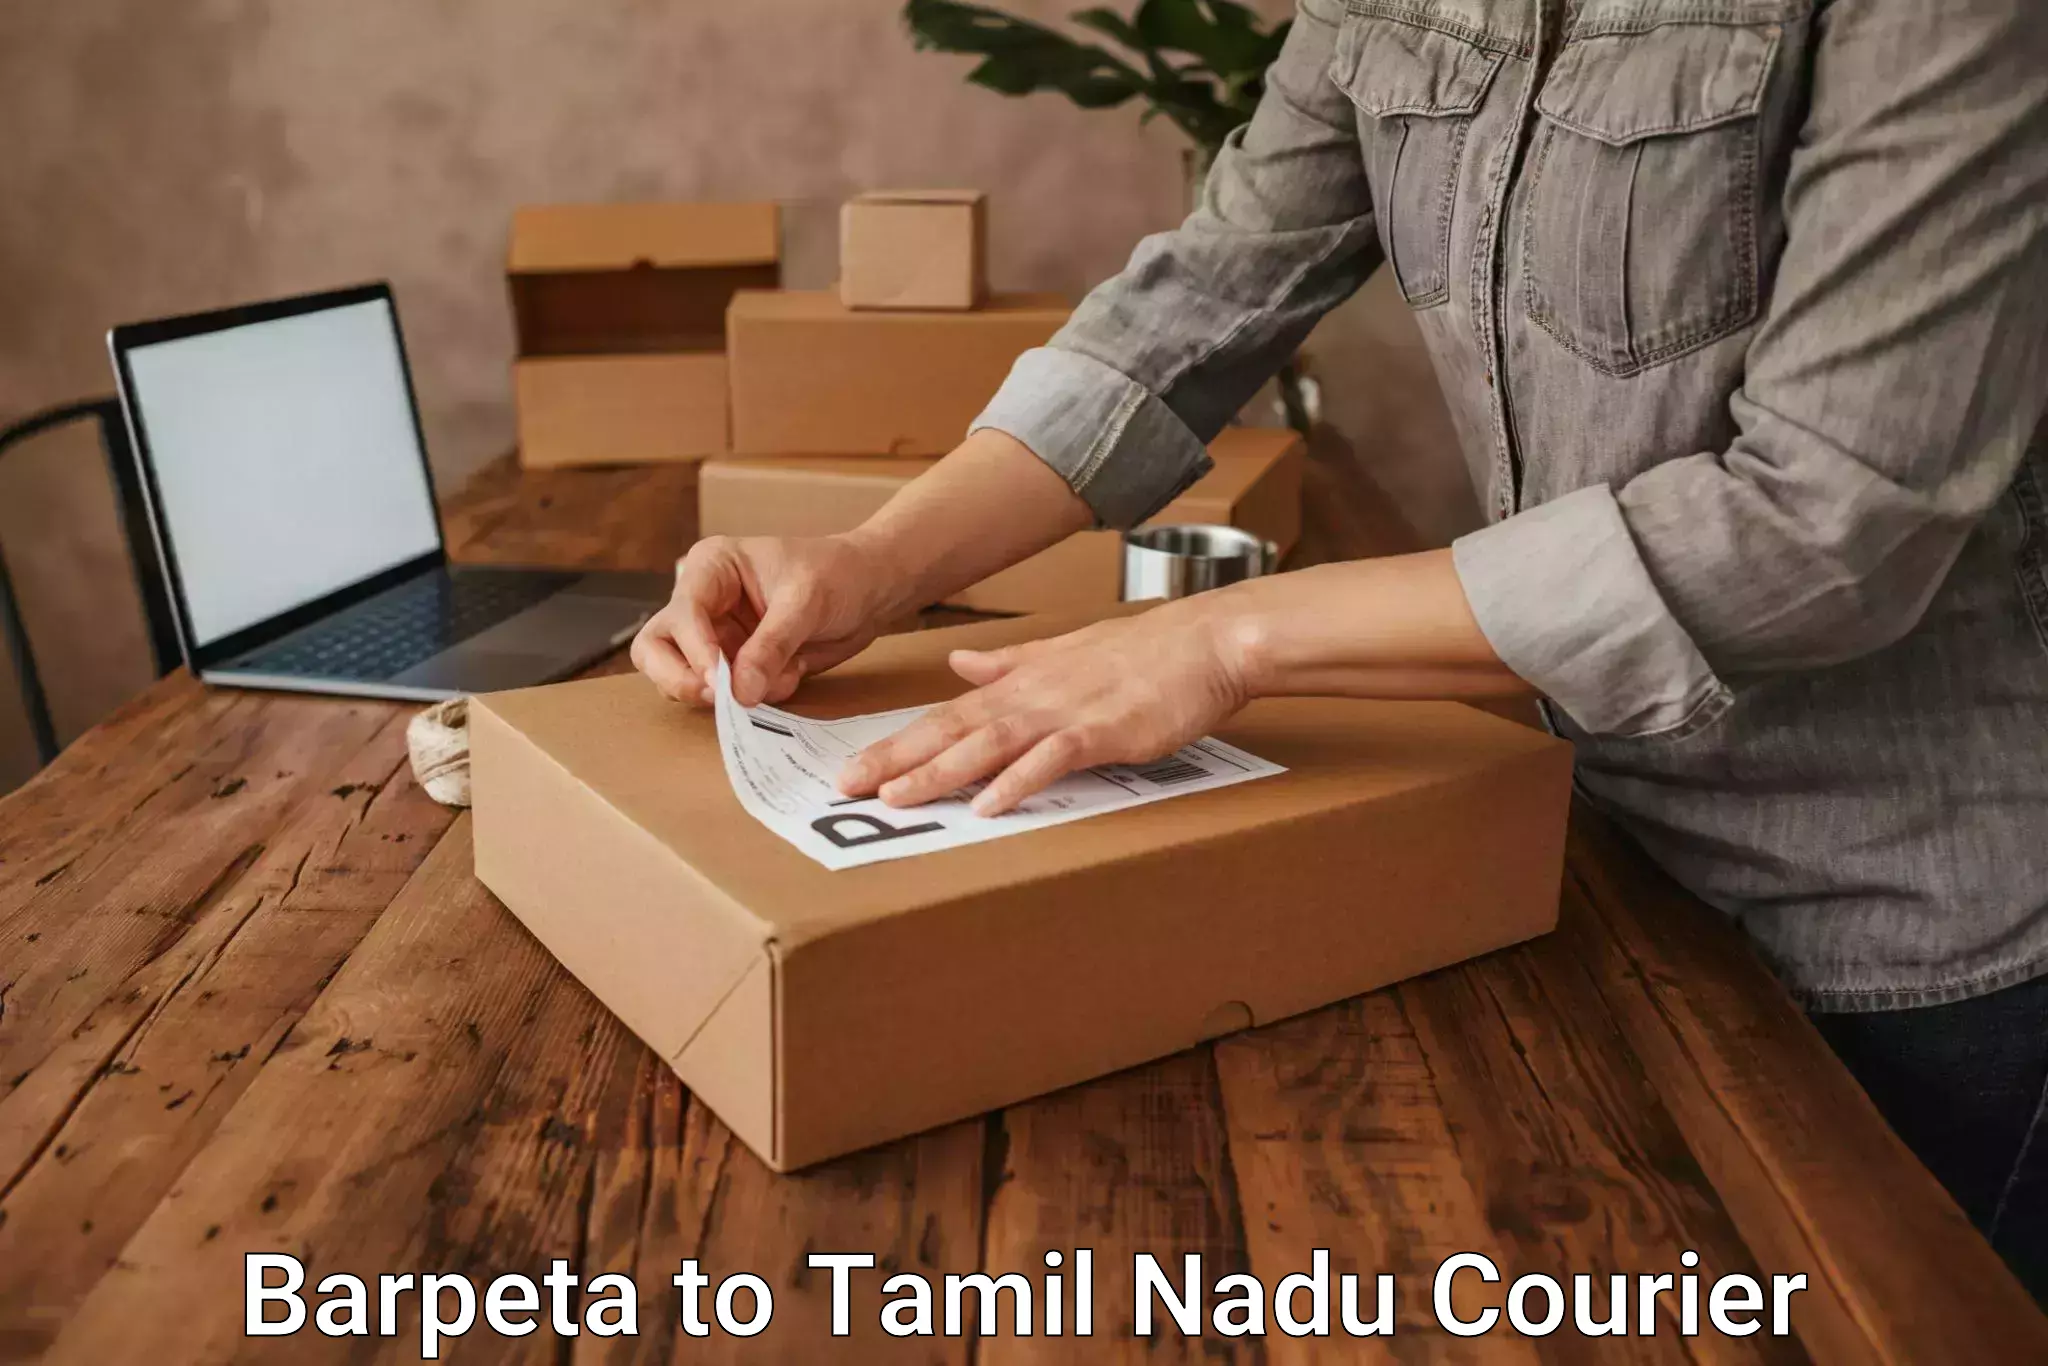 Personalized courier experiences Barpeta to Lalpet